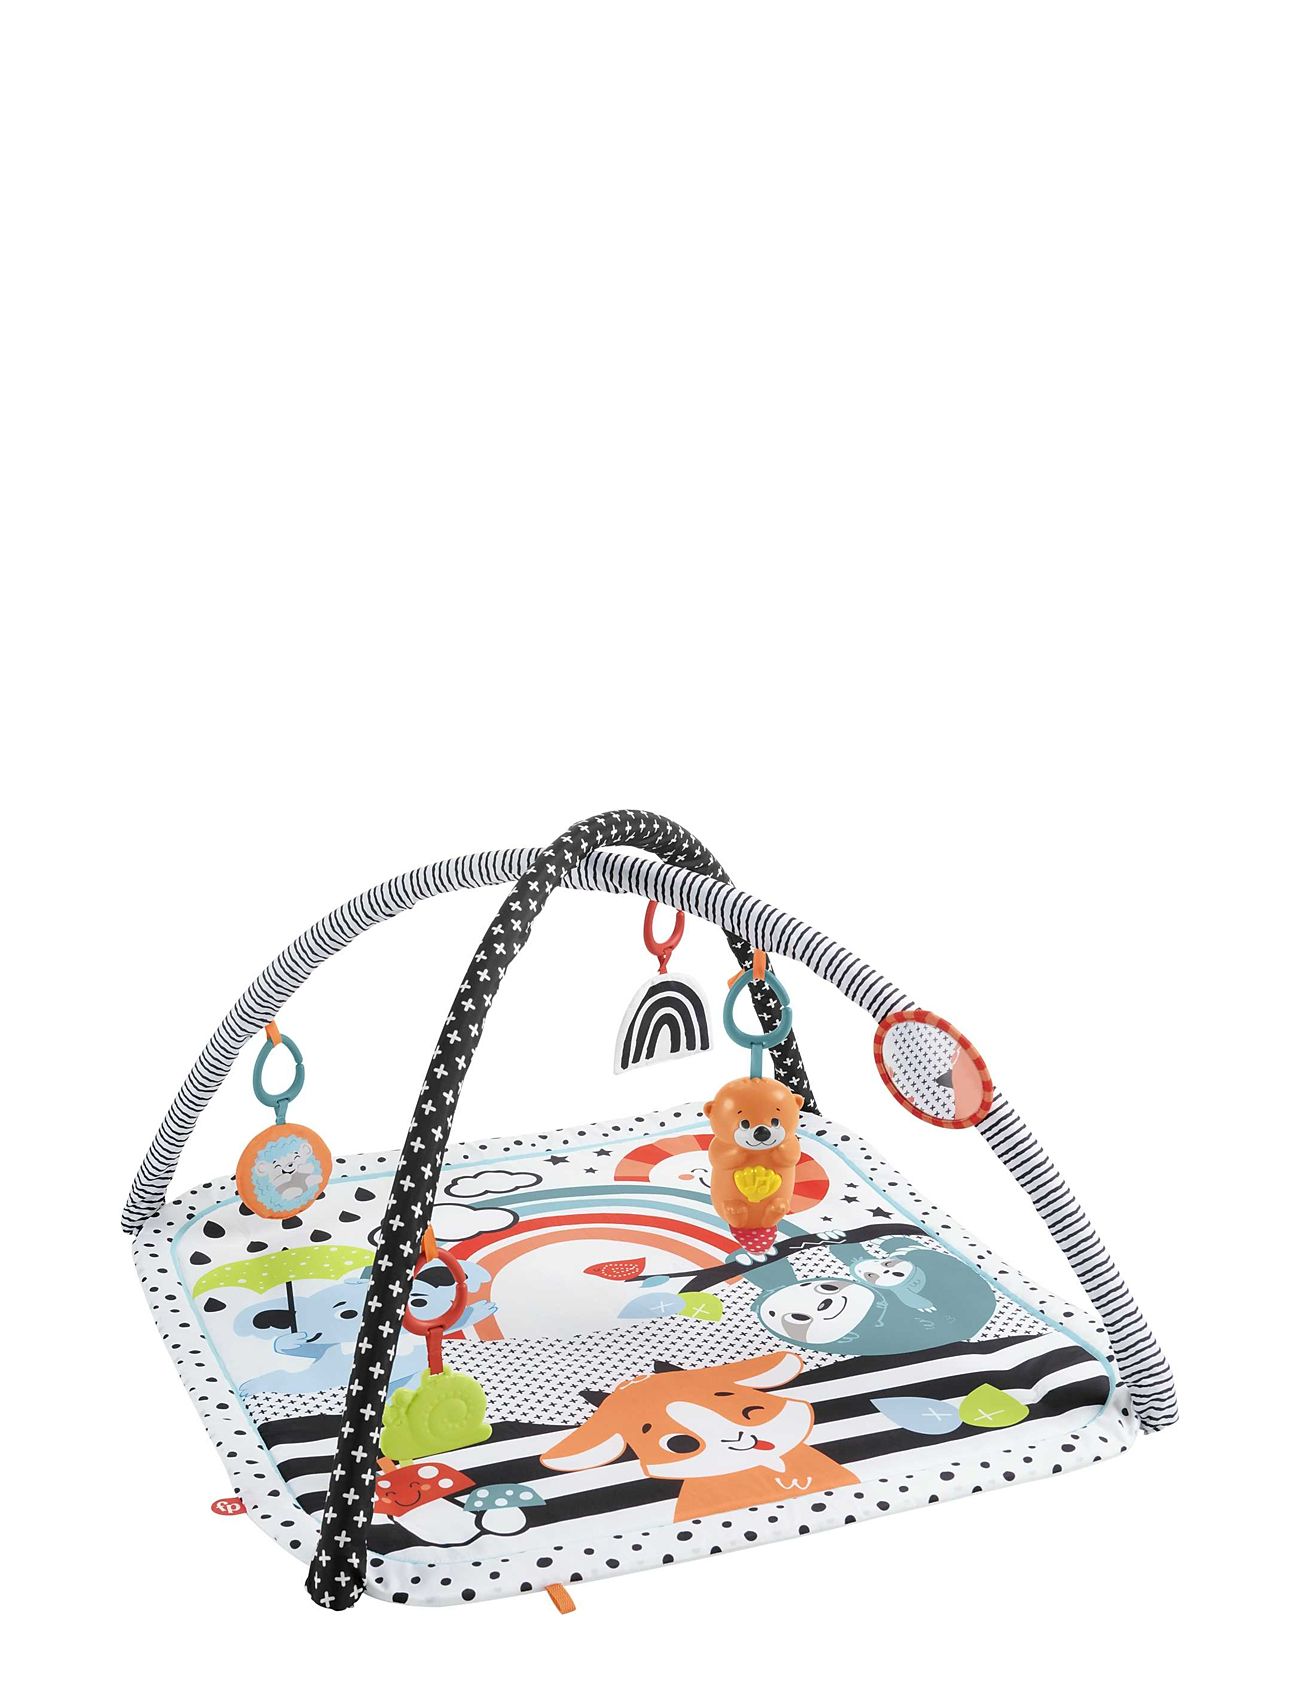 3-In-1 Music, Glow And Grow Gym Patterned Fisher-Price